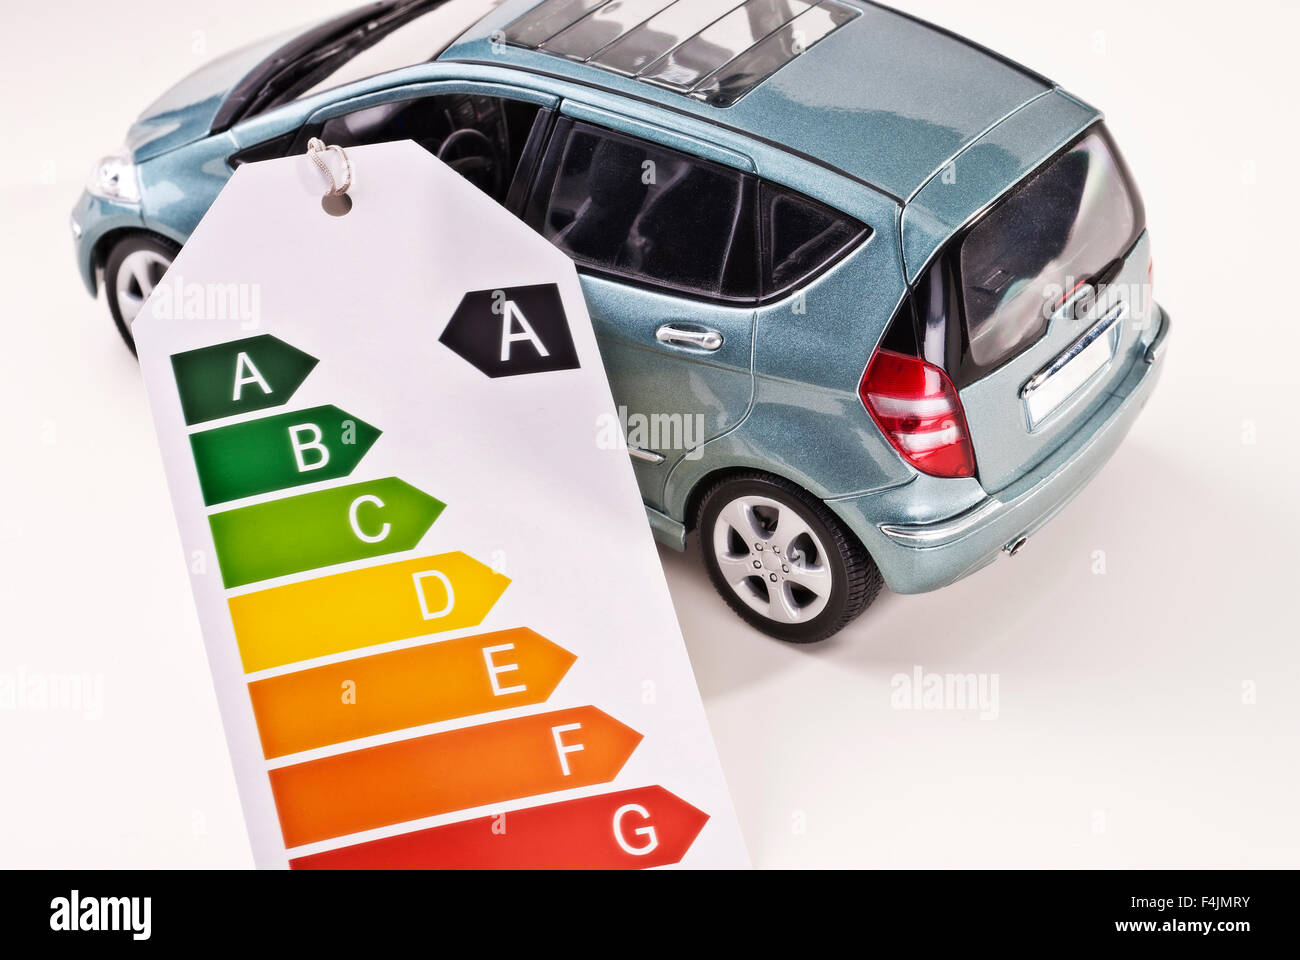 Car with efficiency label as an indication of low emissions. Stock Photo